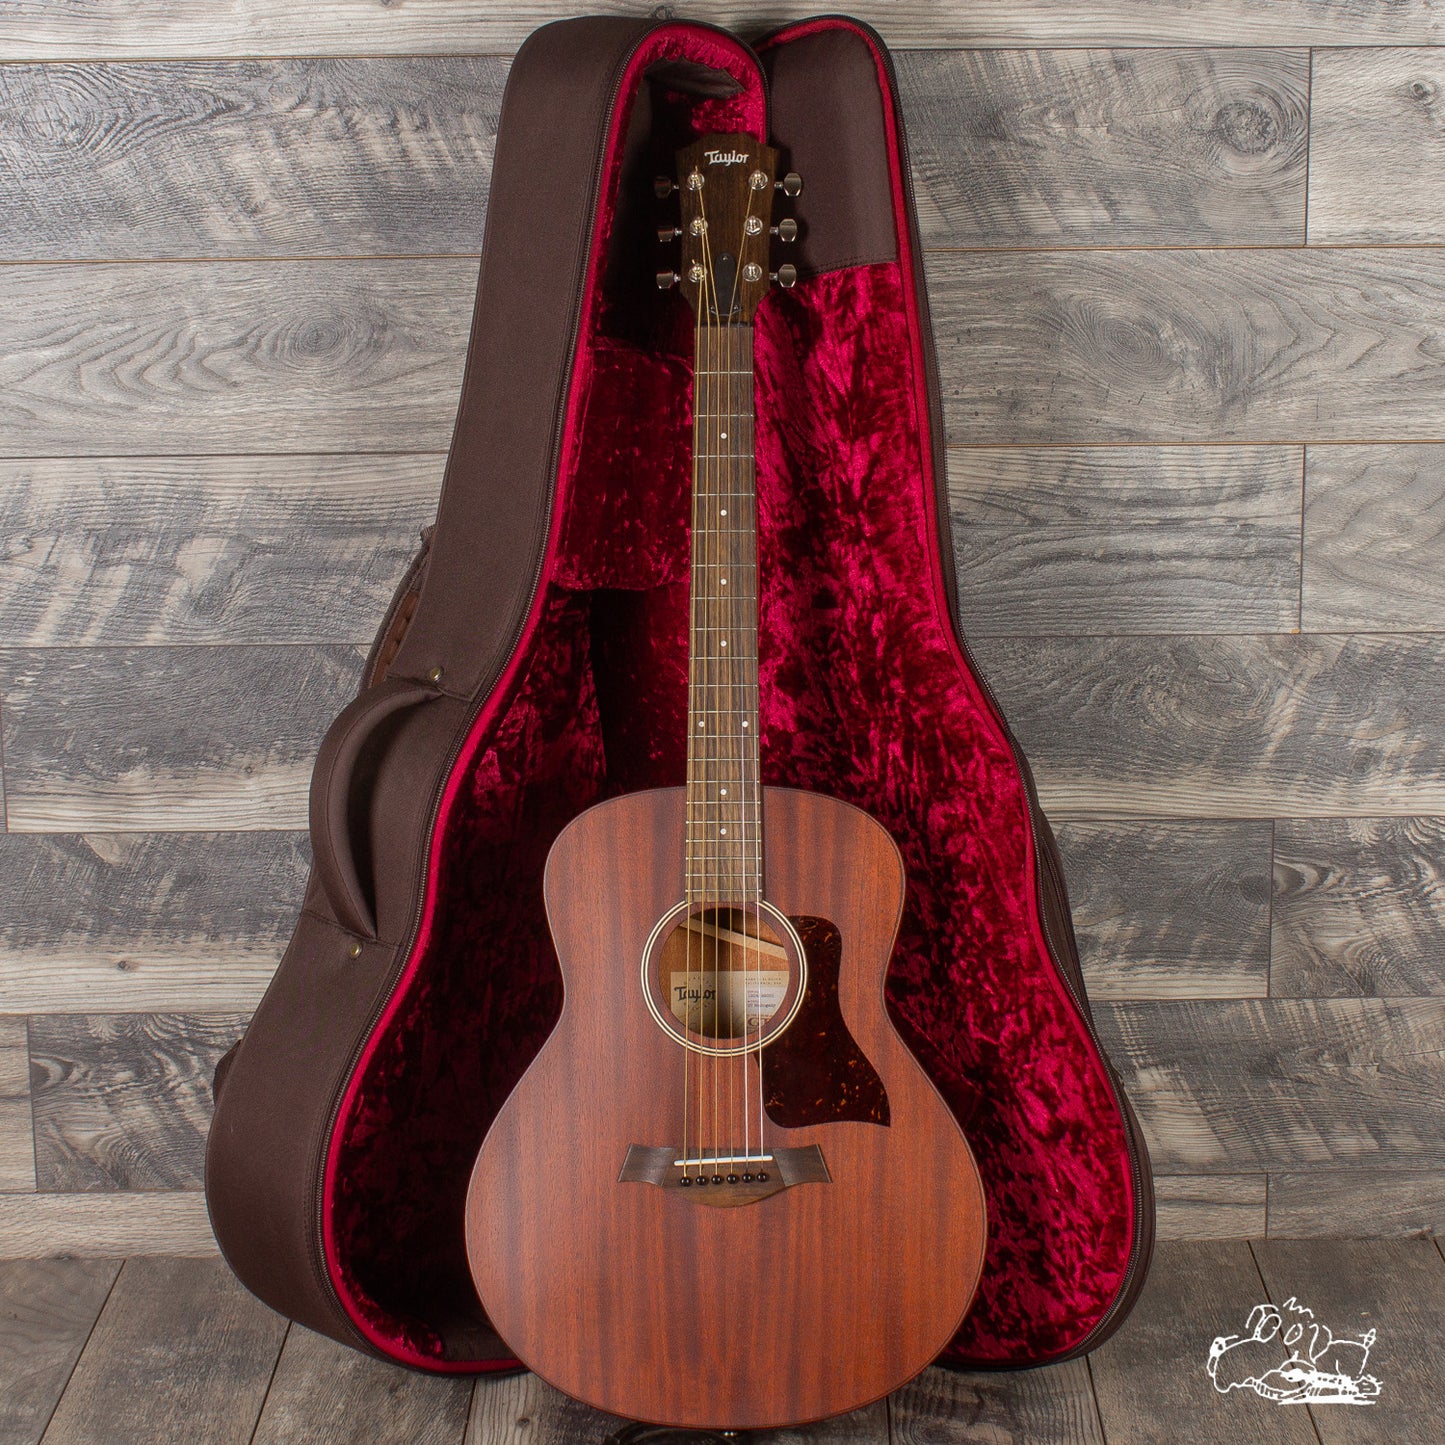 2022 Taylor GT Mahogany Grand Theater Acoustic